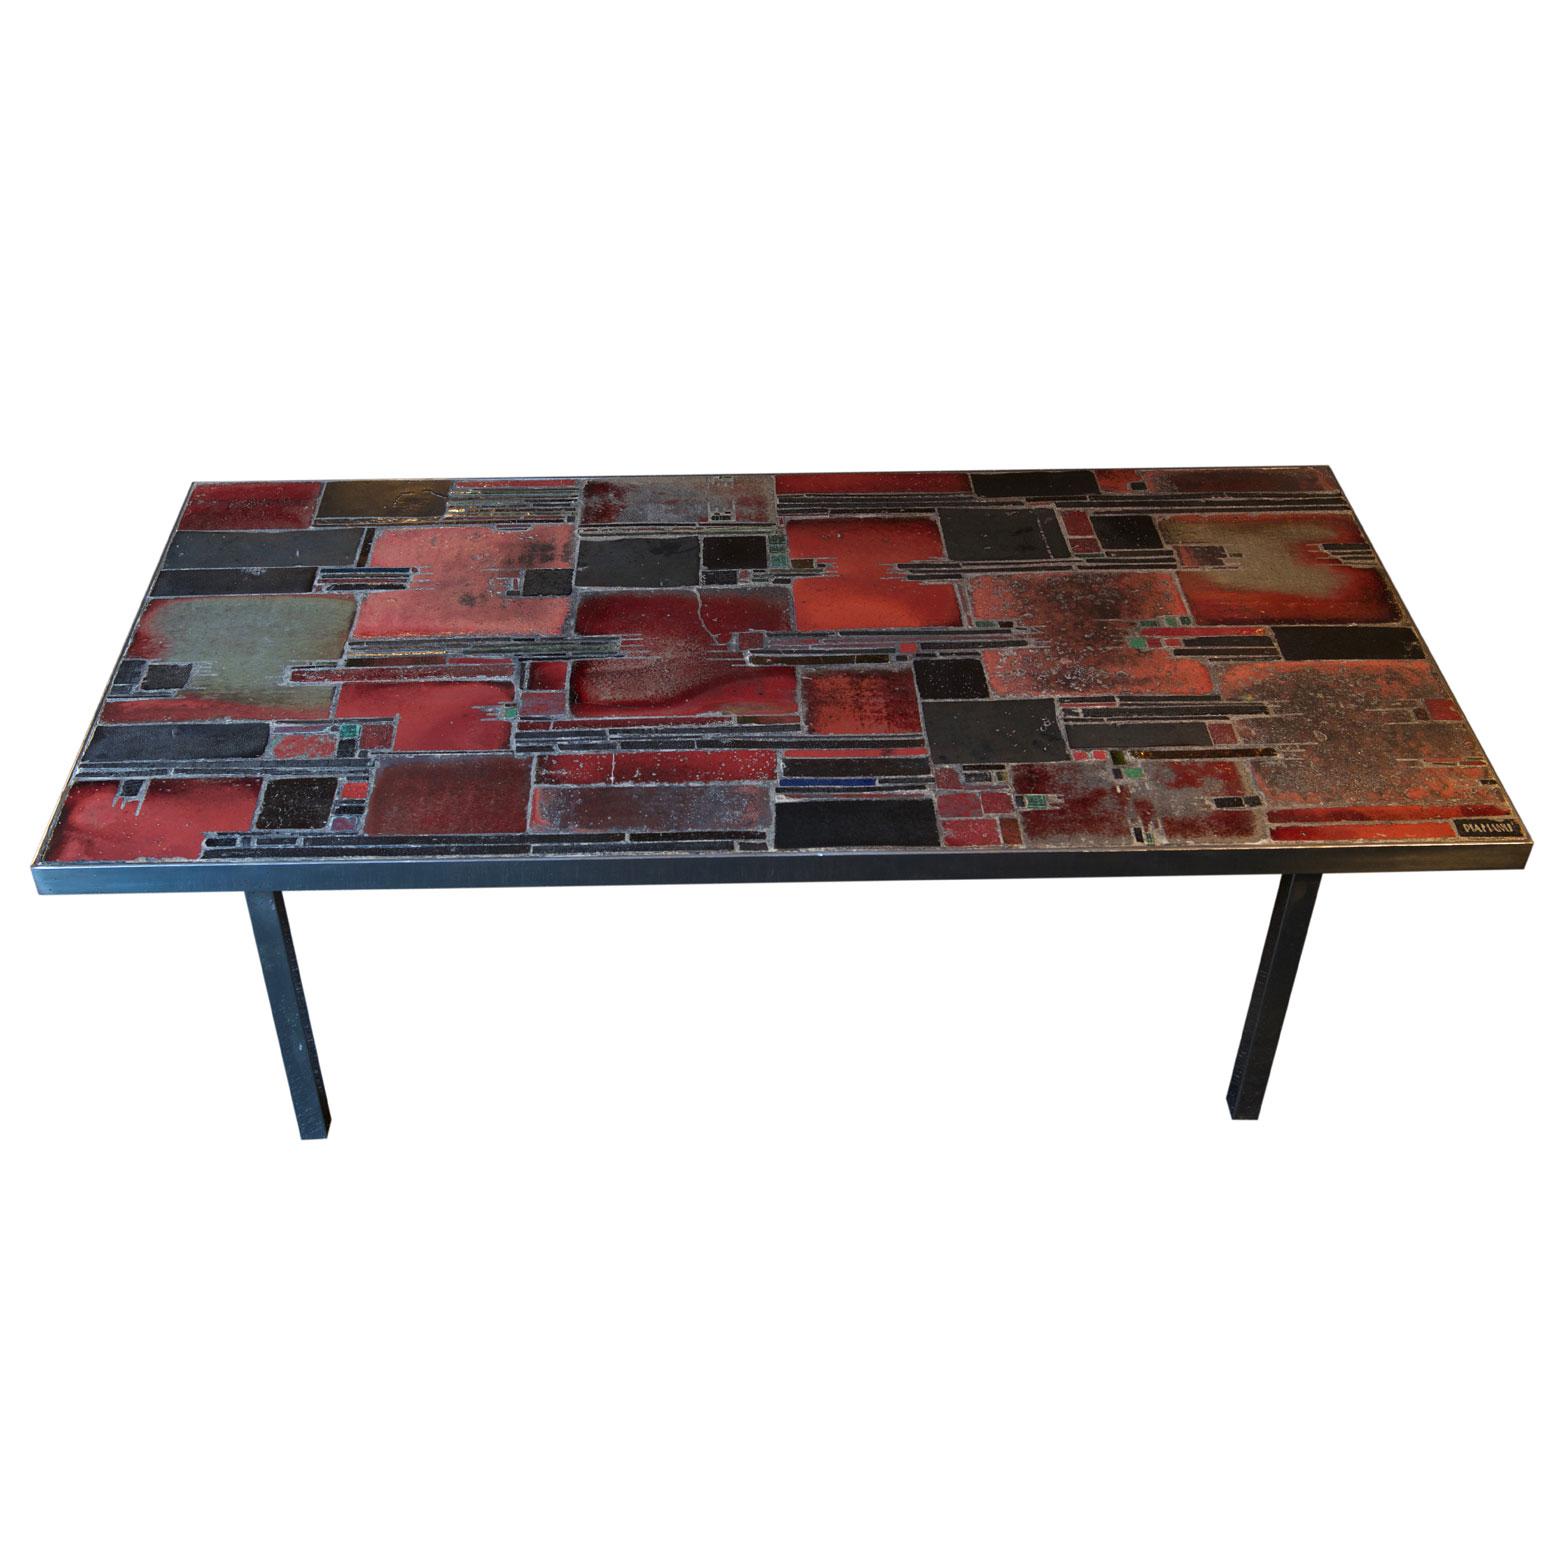 Pia Manu, Low Table in Ceramic, Slate and Chromed Metal, Belgium, 1960s For Sale